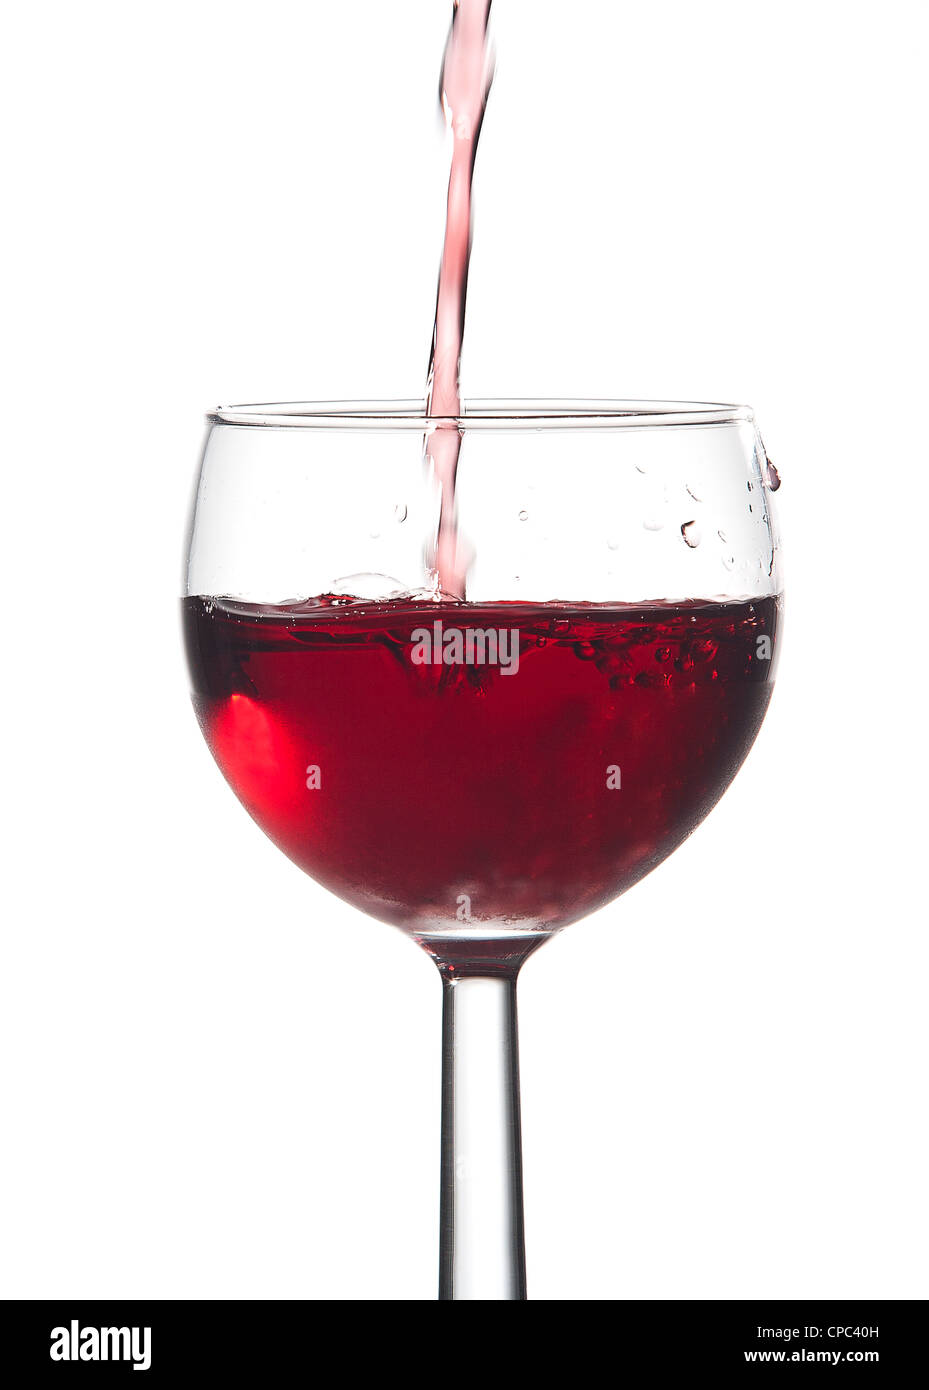 Bubbles from pouring red wine into a glass against a white background. Stock Photo